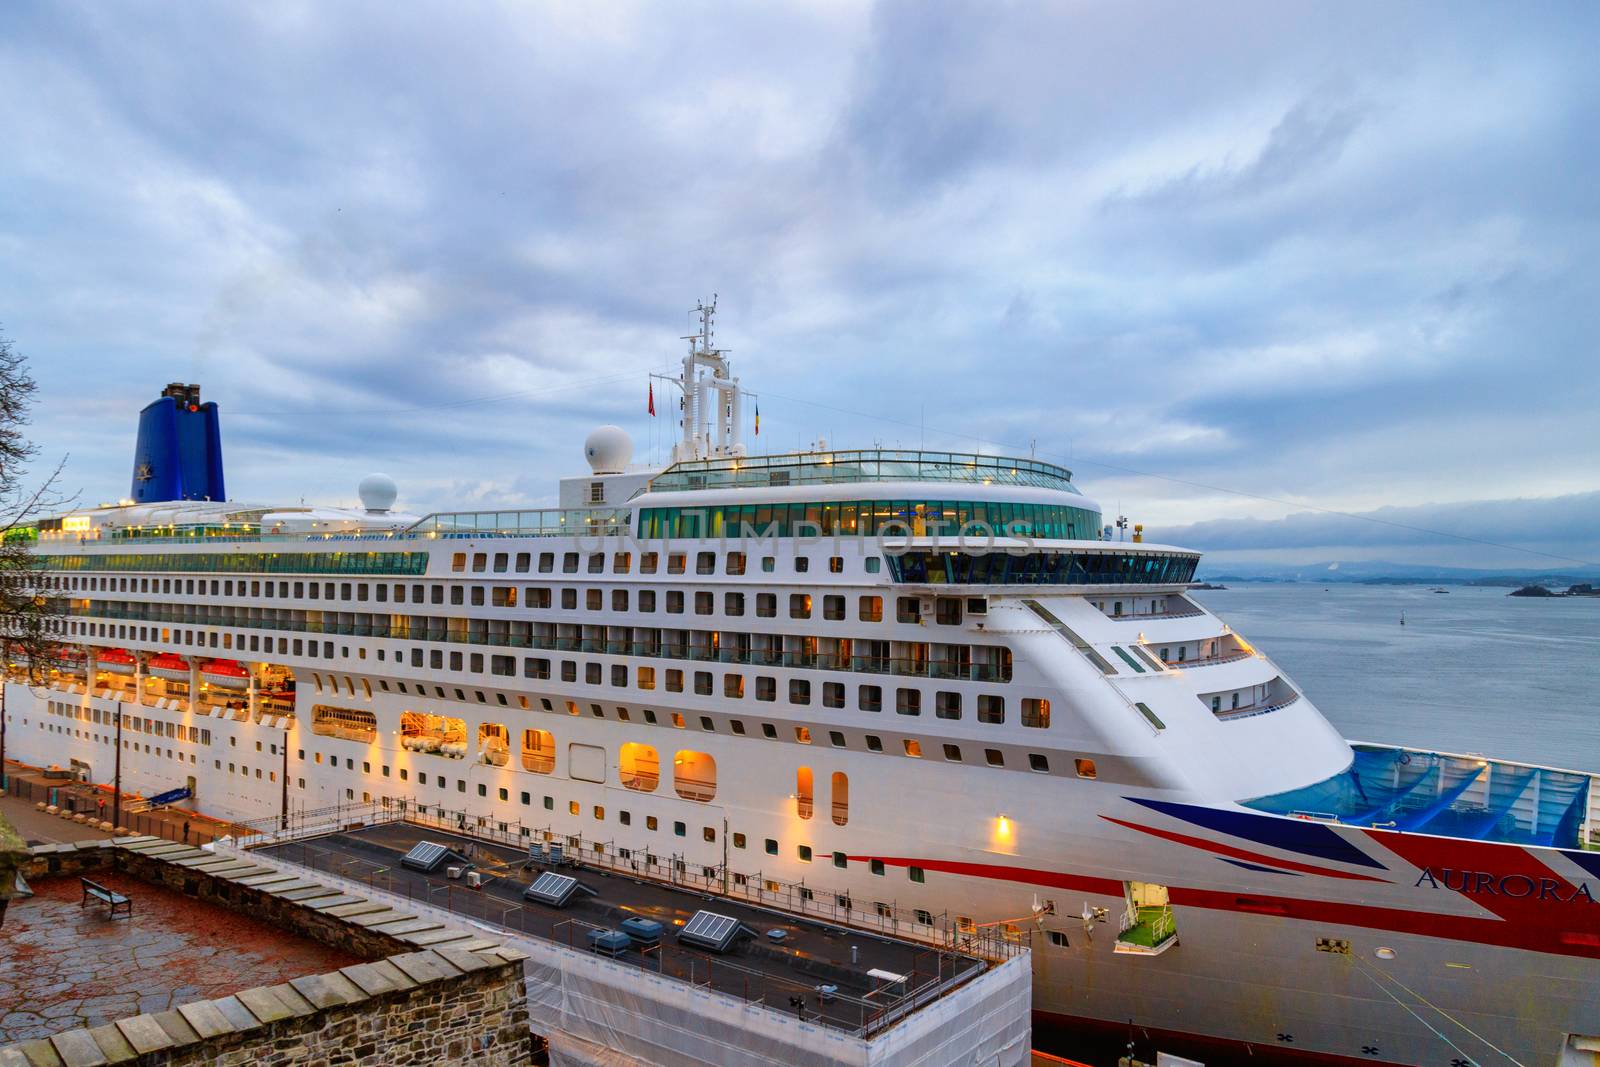 Norway, Oslo, CIRCA 2020: MV Aurora cruise ship of the P&O Cruises fleet docked in harbor due to covid19 restrictions. Concept of cruise ship losing money due to coronavirus pandemic